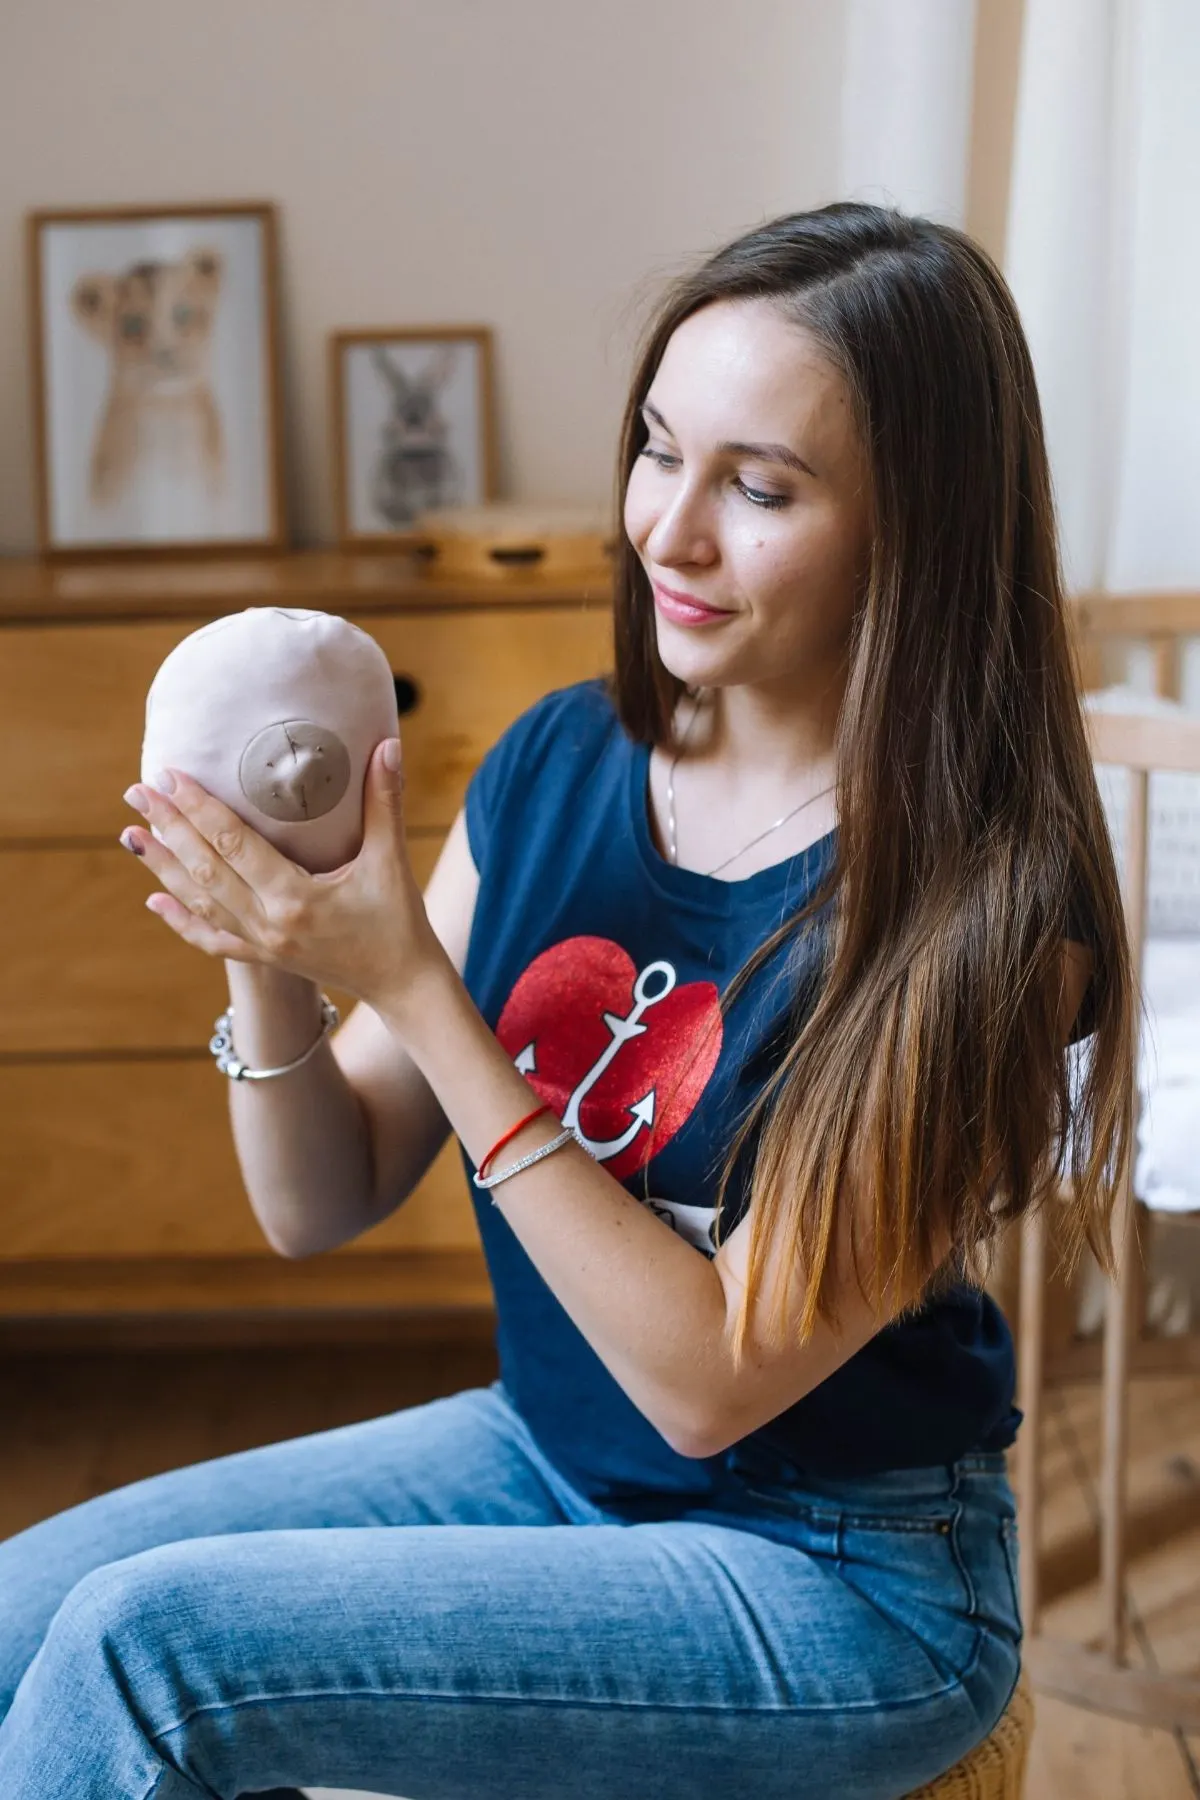 Lactation consultant holds up a breast model made out of cloth cushion.